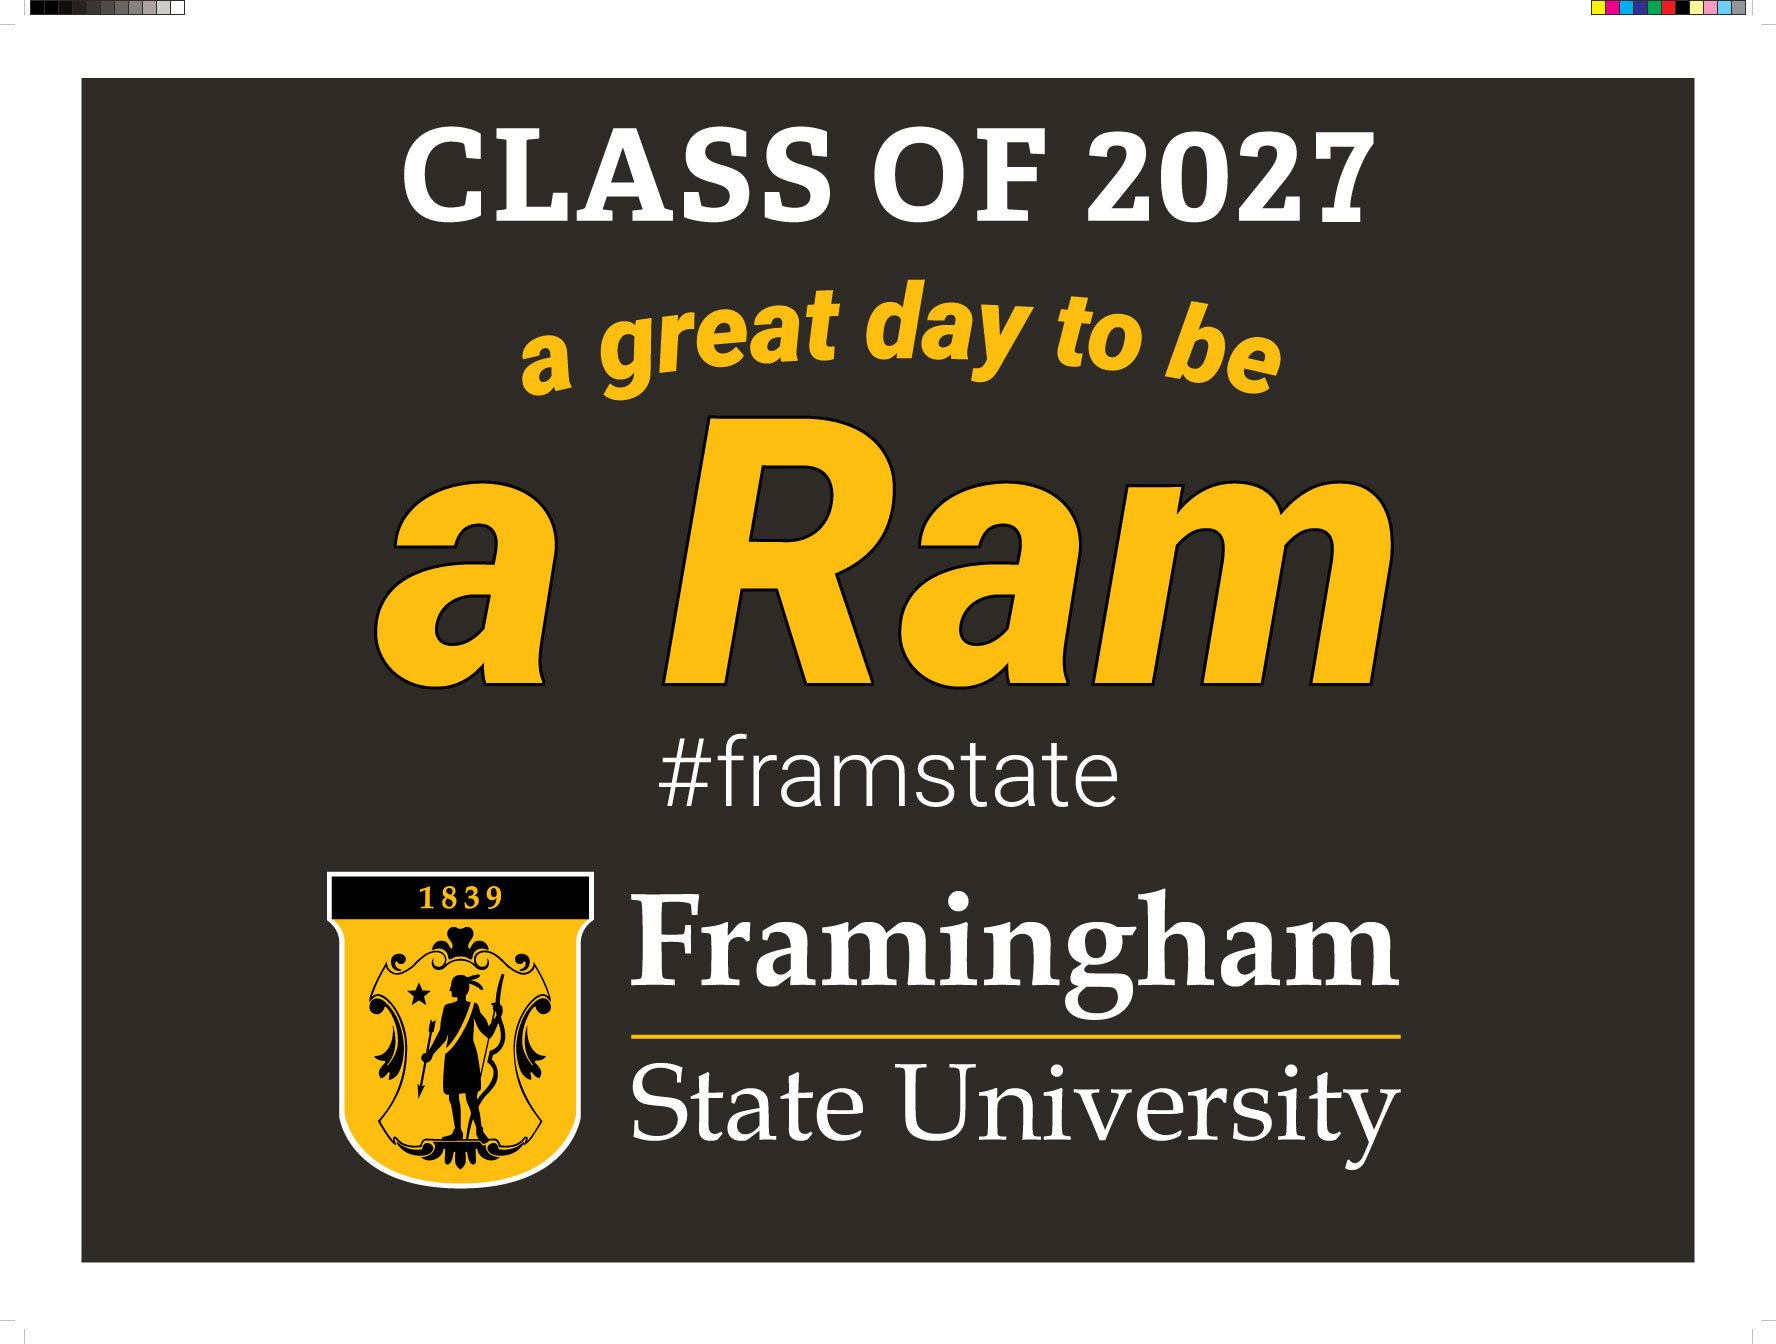 A great day to be a Ram, Class of 2027, Framingham State University, #framstate